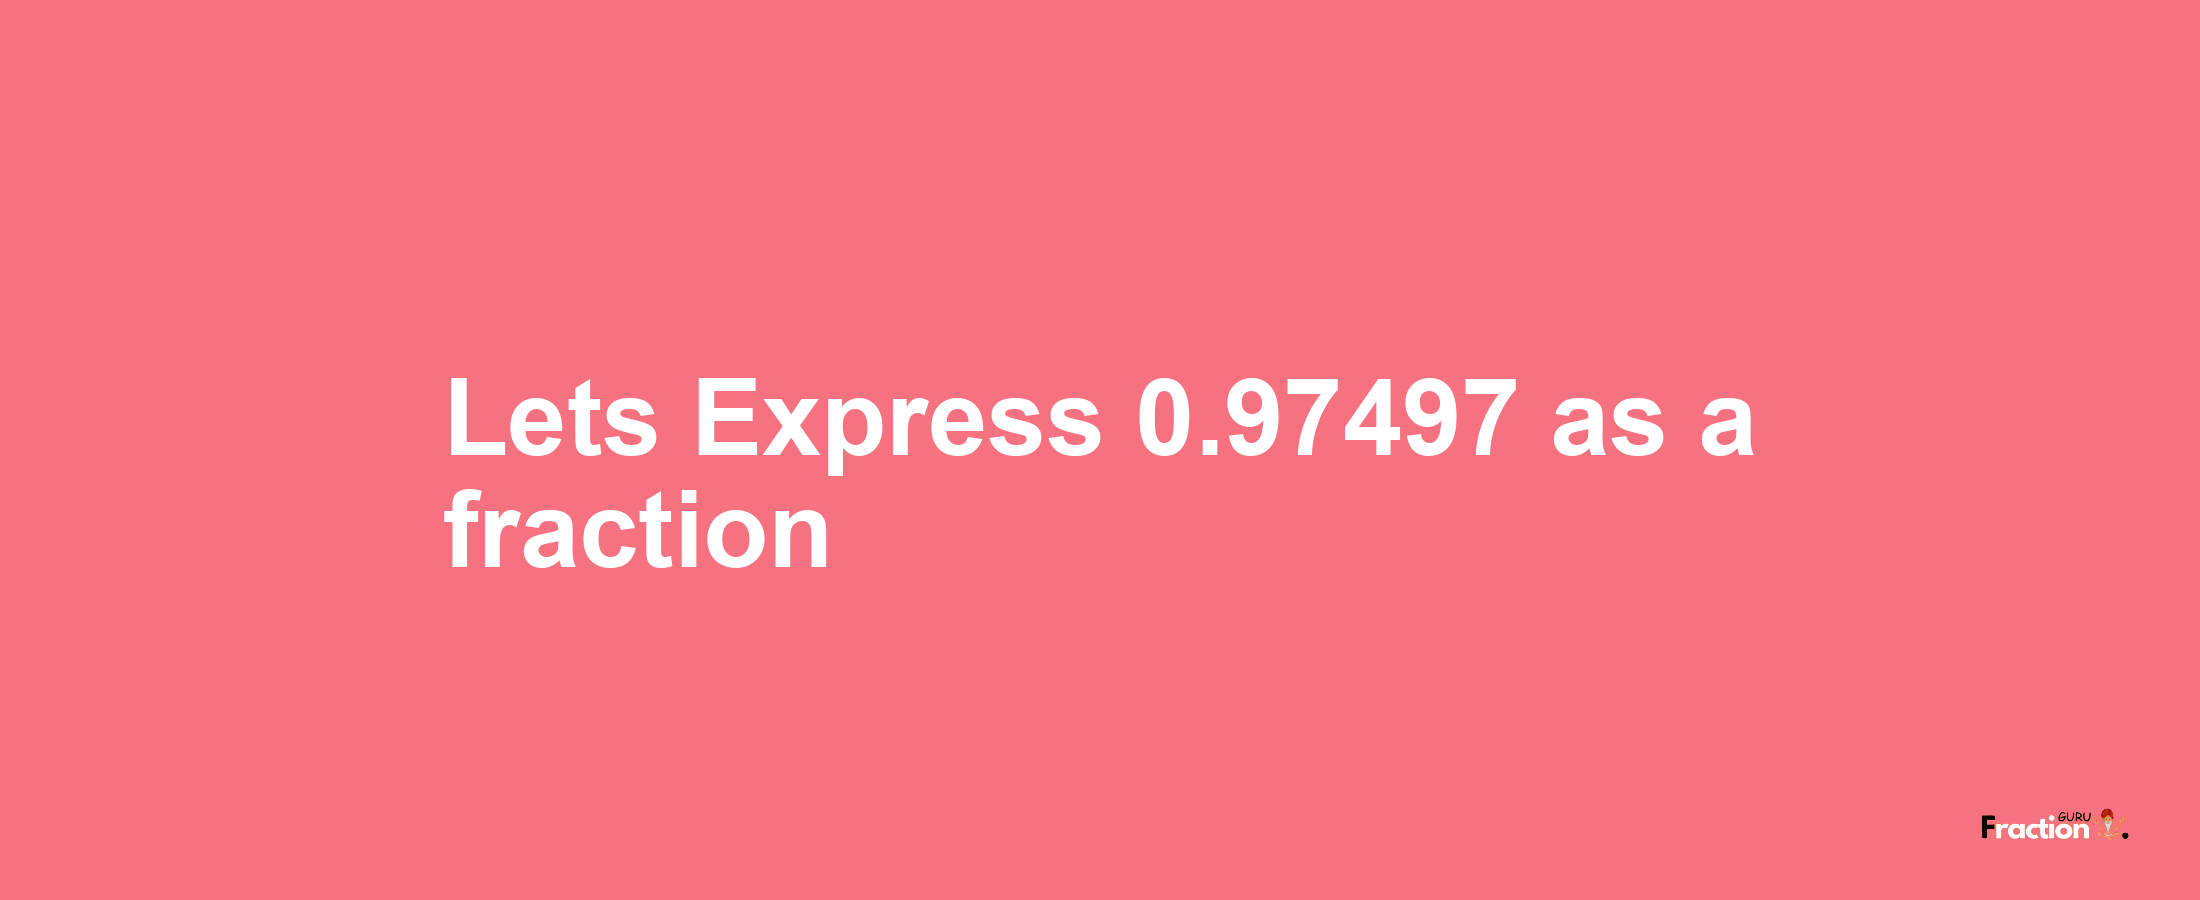 Lets Express 0.97497 as afraction